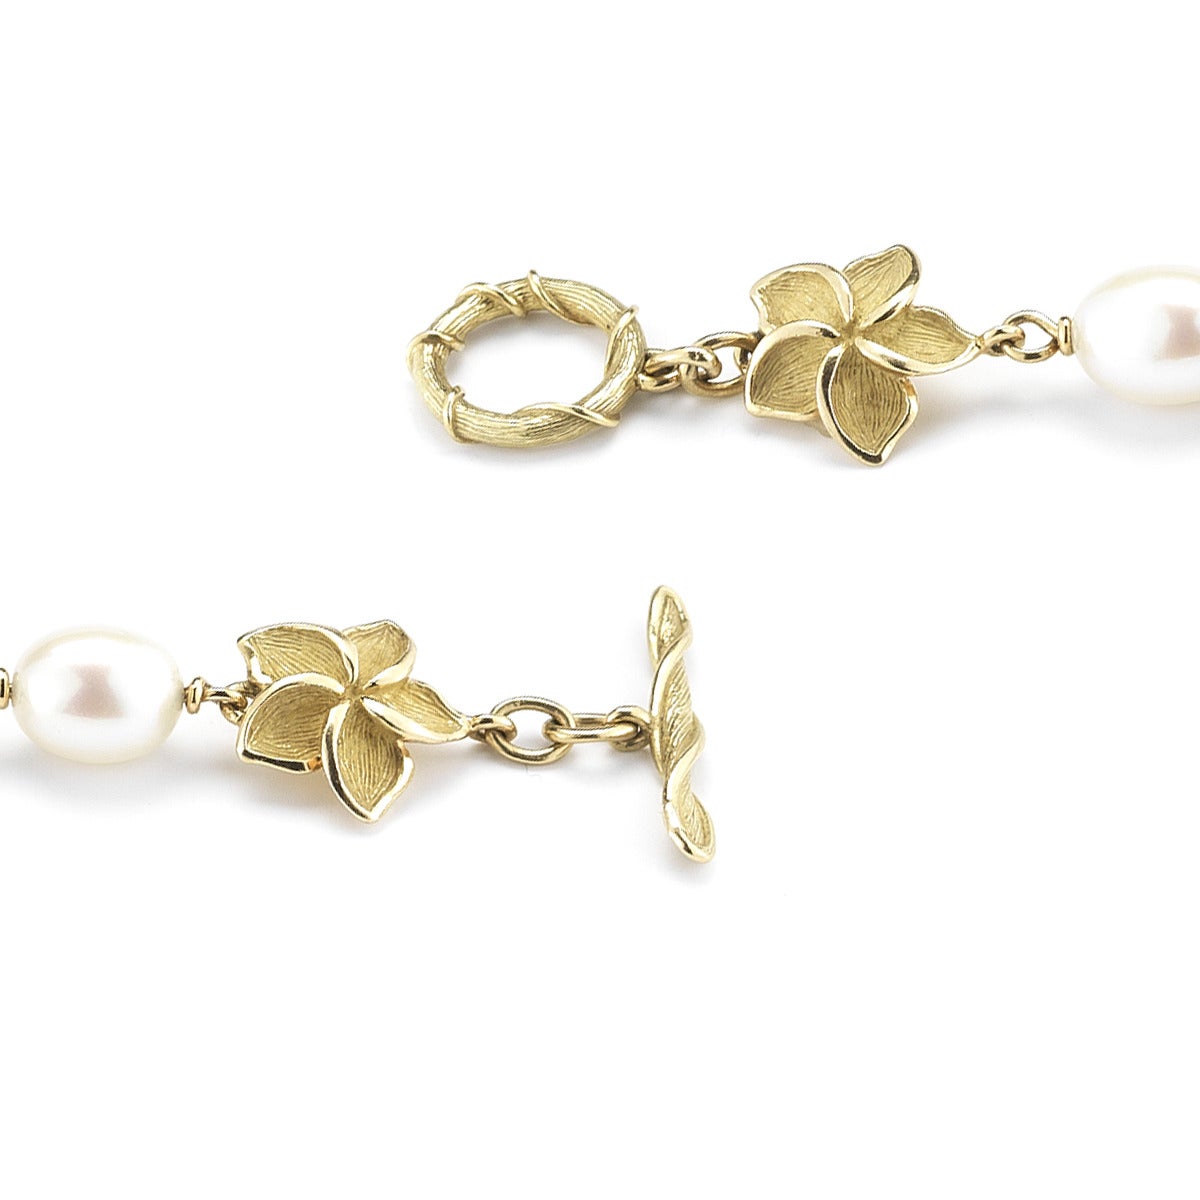 Women's Tiffany & Co. Cultured Pearl and 18K Gold Floral Motif Bracelet